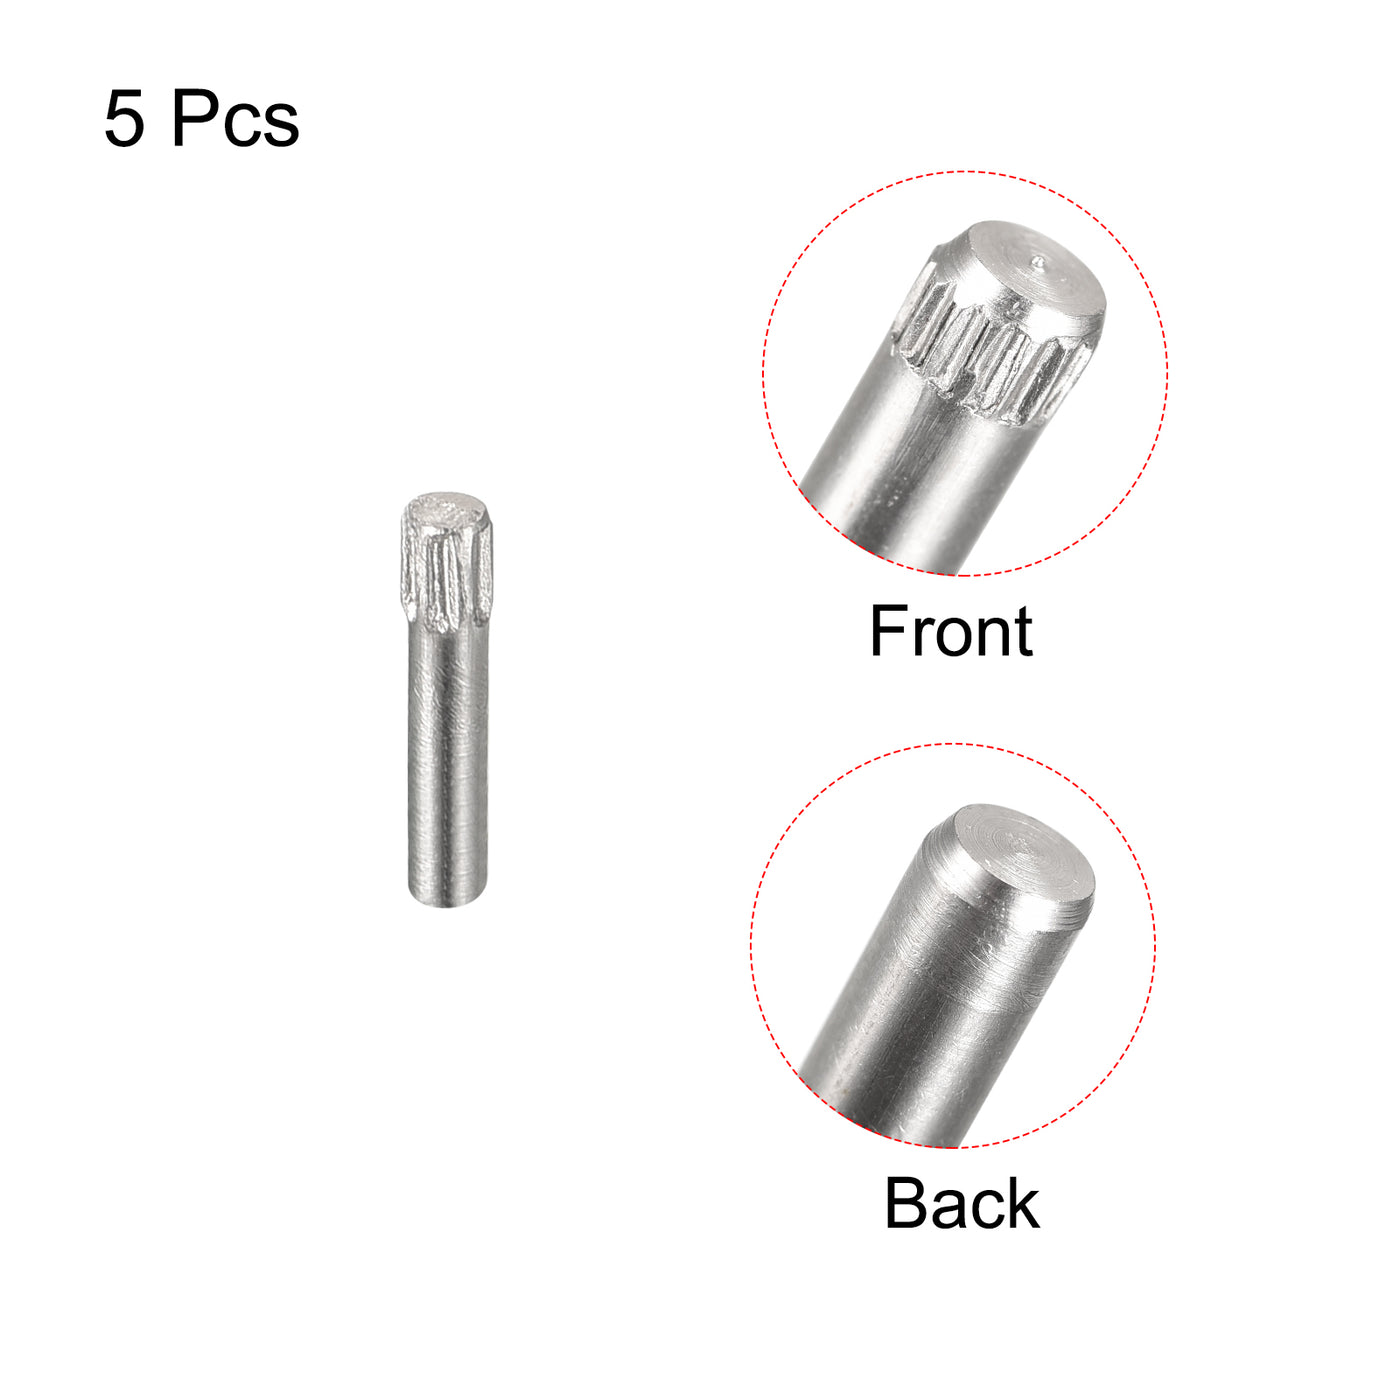 uxcell Uxcell 1.5x8mm 304 Stainless Steel Dowel Pins, 5Pcs Knurled Head Flat End Dowel Pin